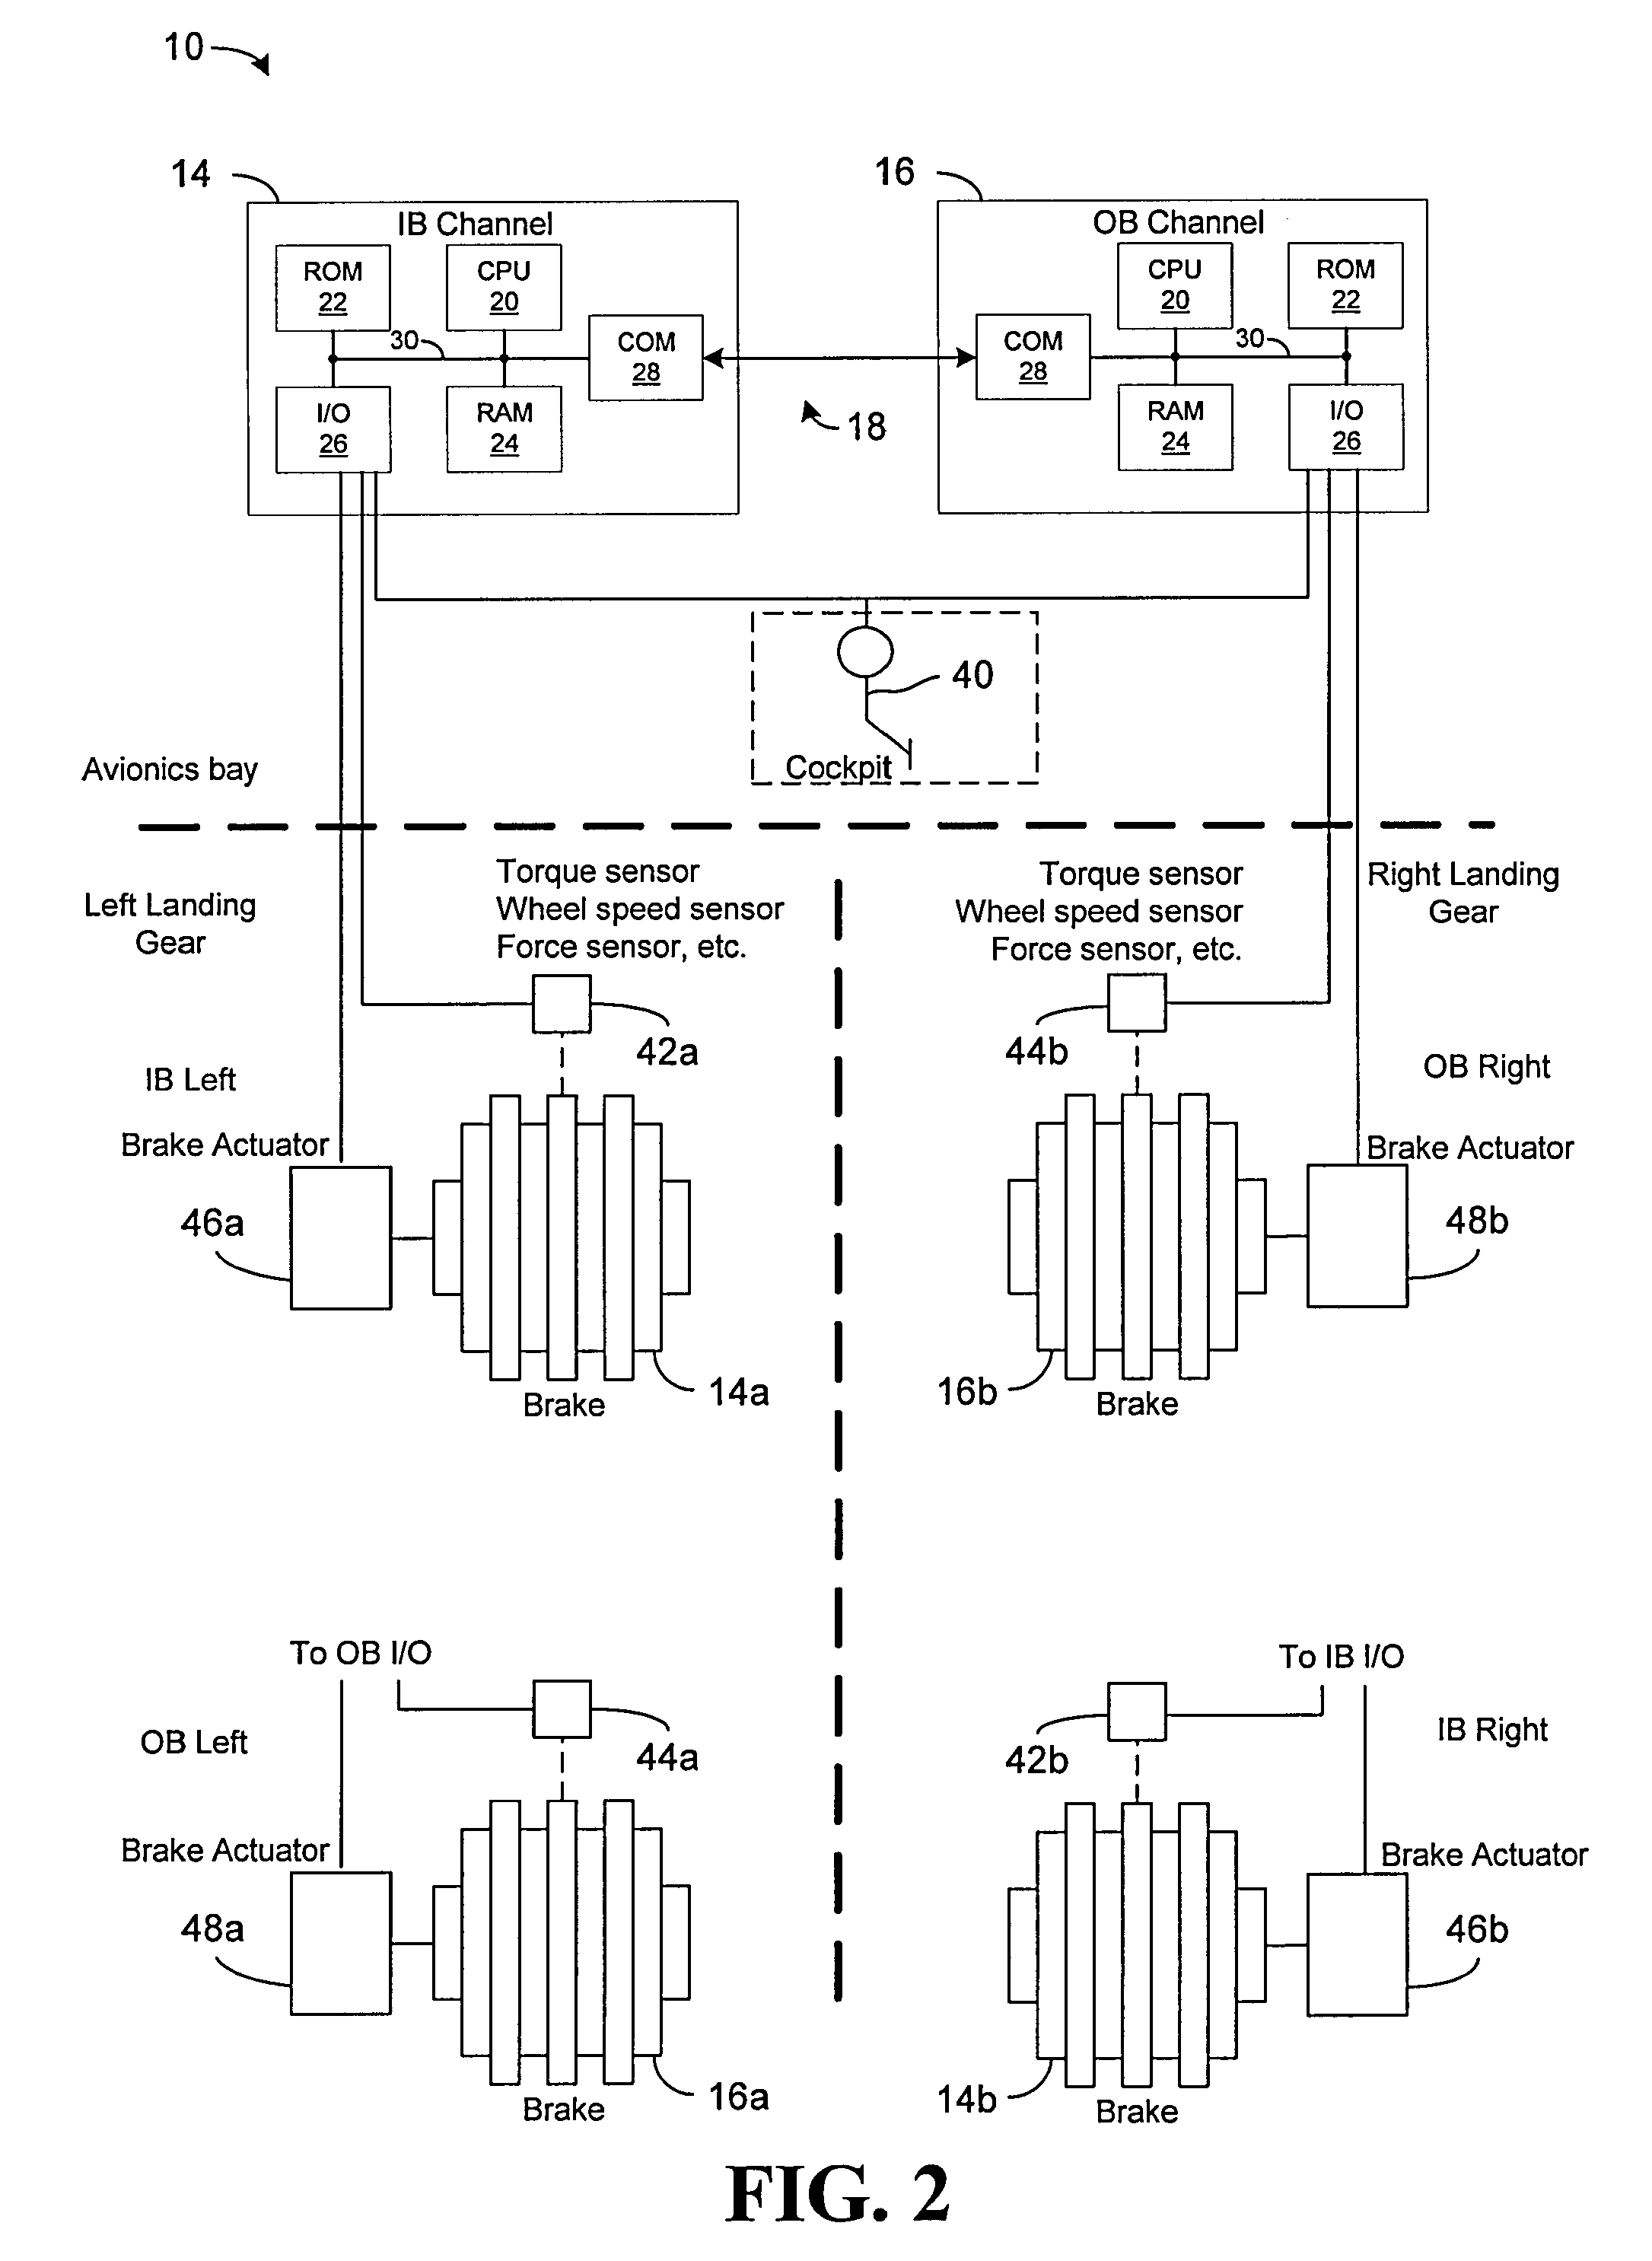 Independent brake control of a common aircraft gear